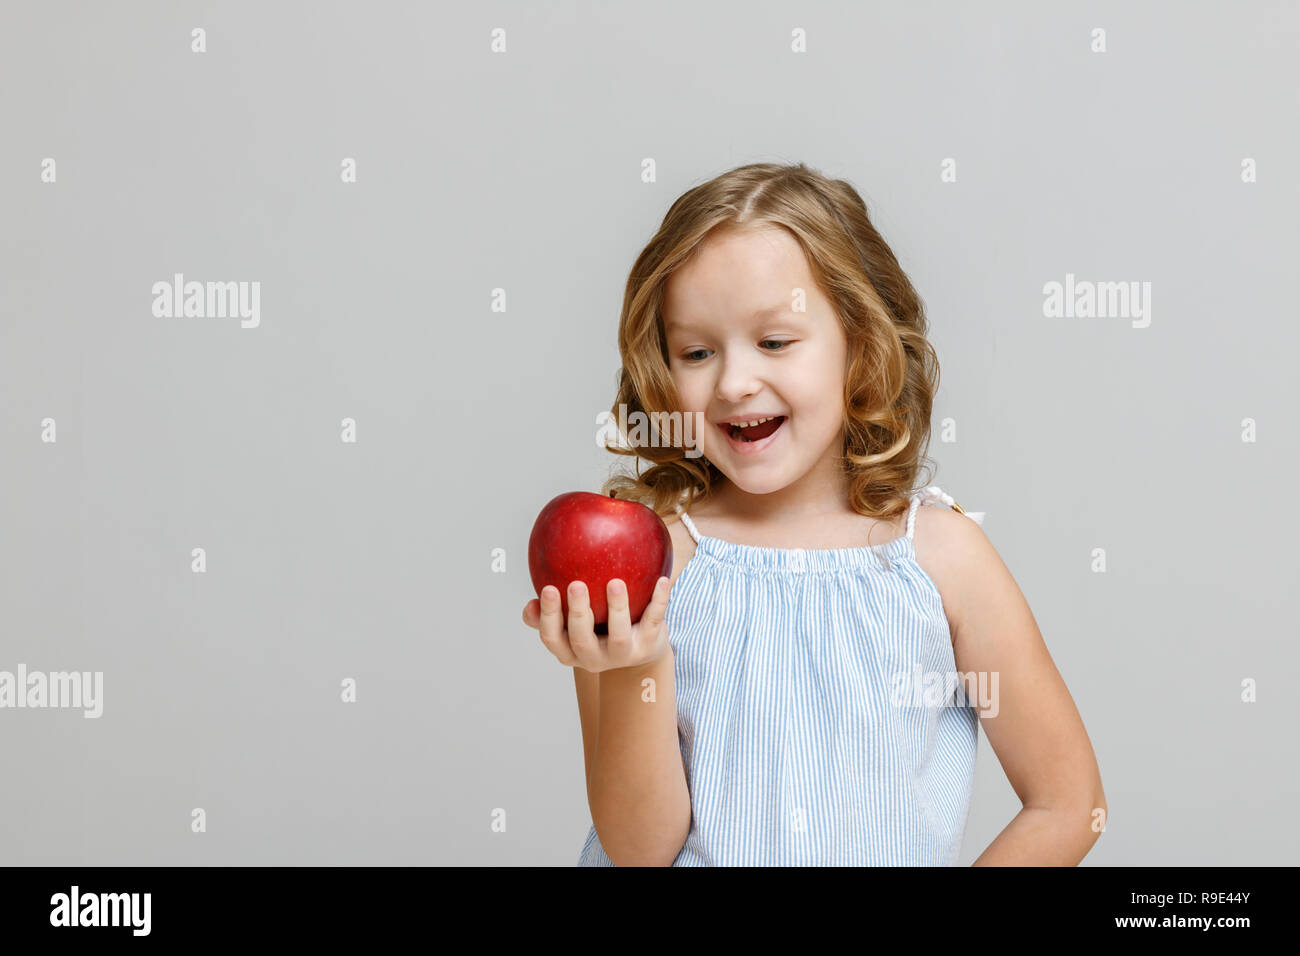 Portrait of a happy smiling little blonde girl on a gray background. The child is looking and ready to eat red apple Stock Photo